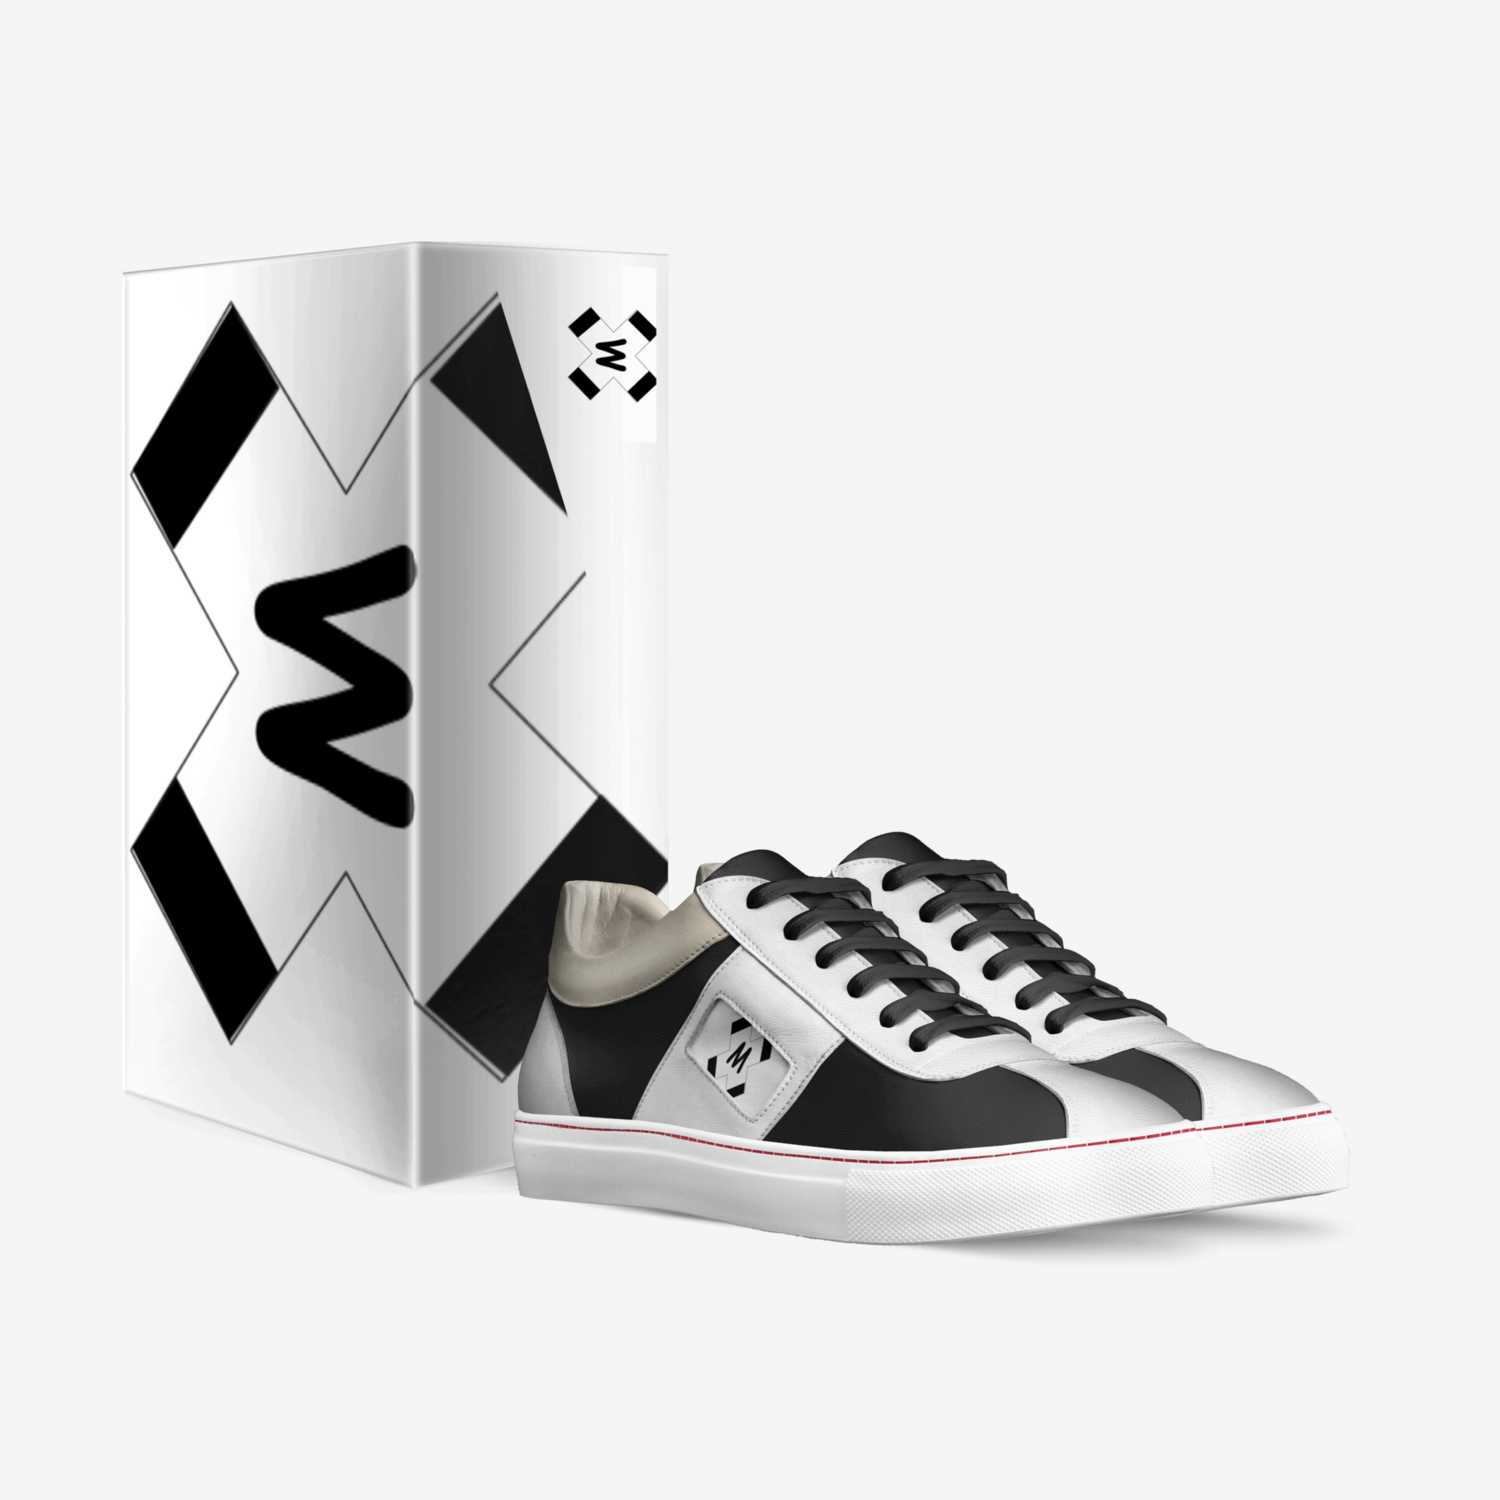 M custom made in Italy shoes by Weirdo Jonboy | Box view